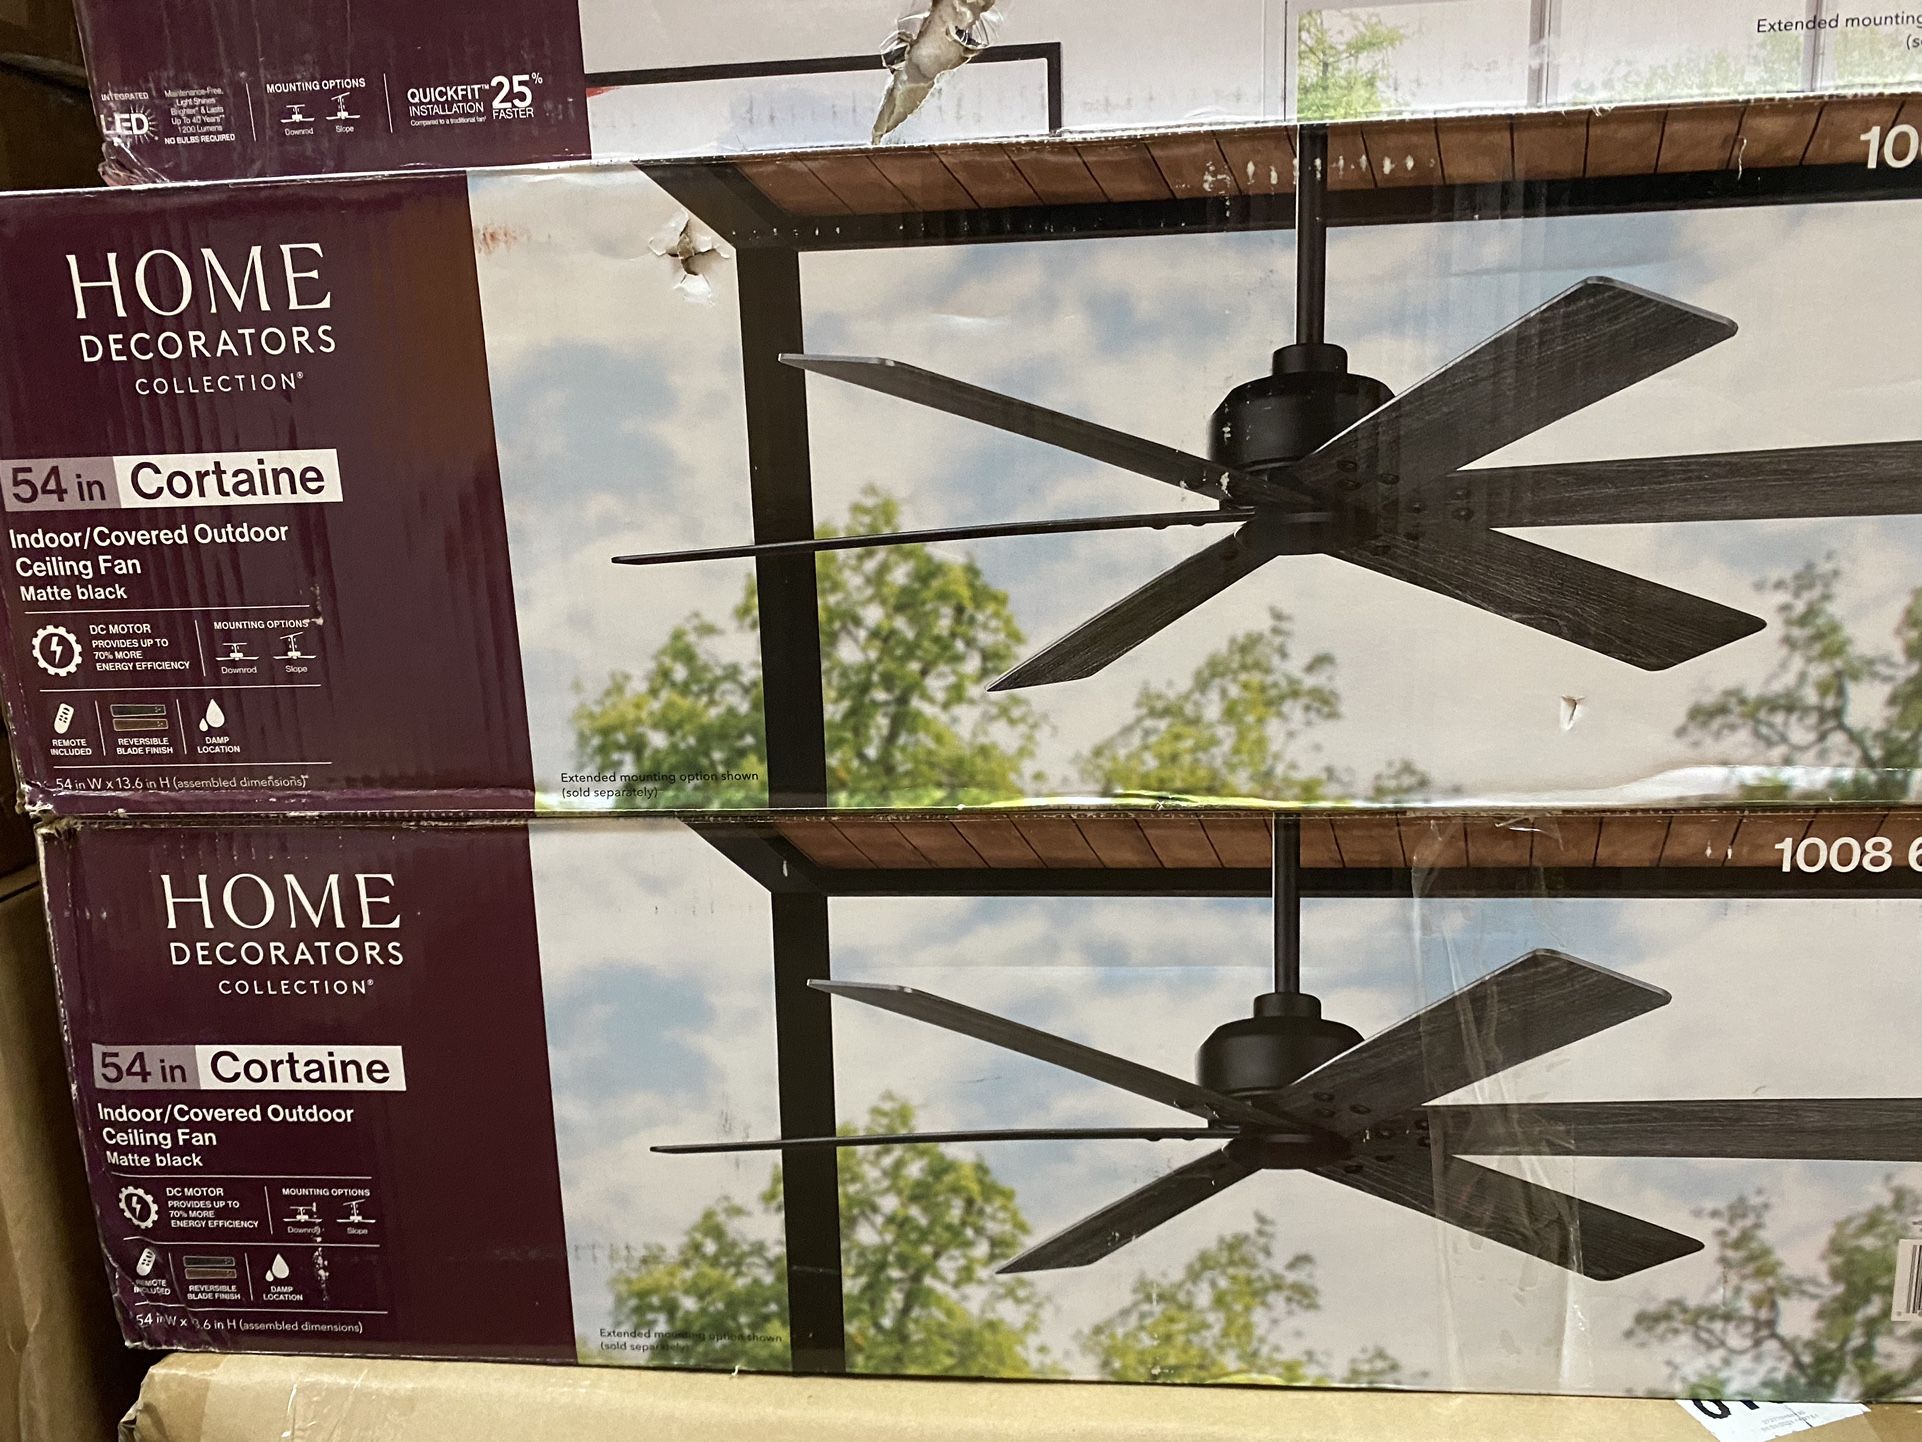 TWO BRAND NEW Home Decorators Collection Cortaine 54 in. Indoor/Outdoor Matte Black Ceiling Fan with DC Motor and Remote Control Included